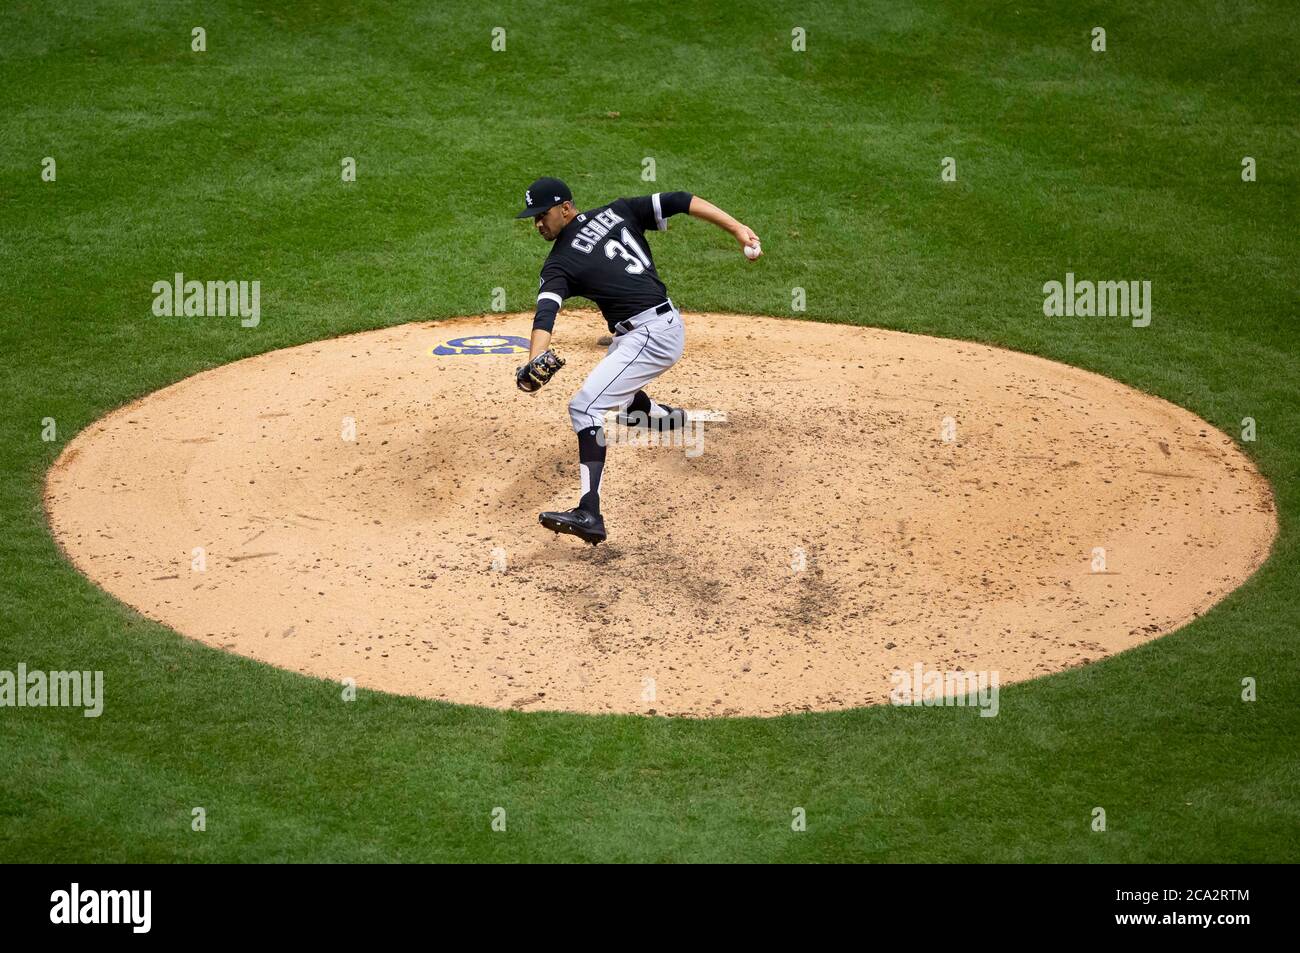 Milwaukee, USA. August 3, 2020: An upper deck view of Chicago White Sox relief pitcher Steve Cishek #31 delivering a pitch during the Major League Baseball game between the Milwaukee Brewers and the Chicago White Sox at Miller Park in Milwaukee, WI. John Fisher/CSM Credit: Cal Sport Media/Alamy Live News Stock Photo